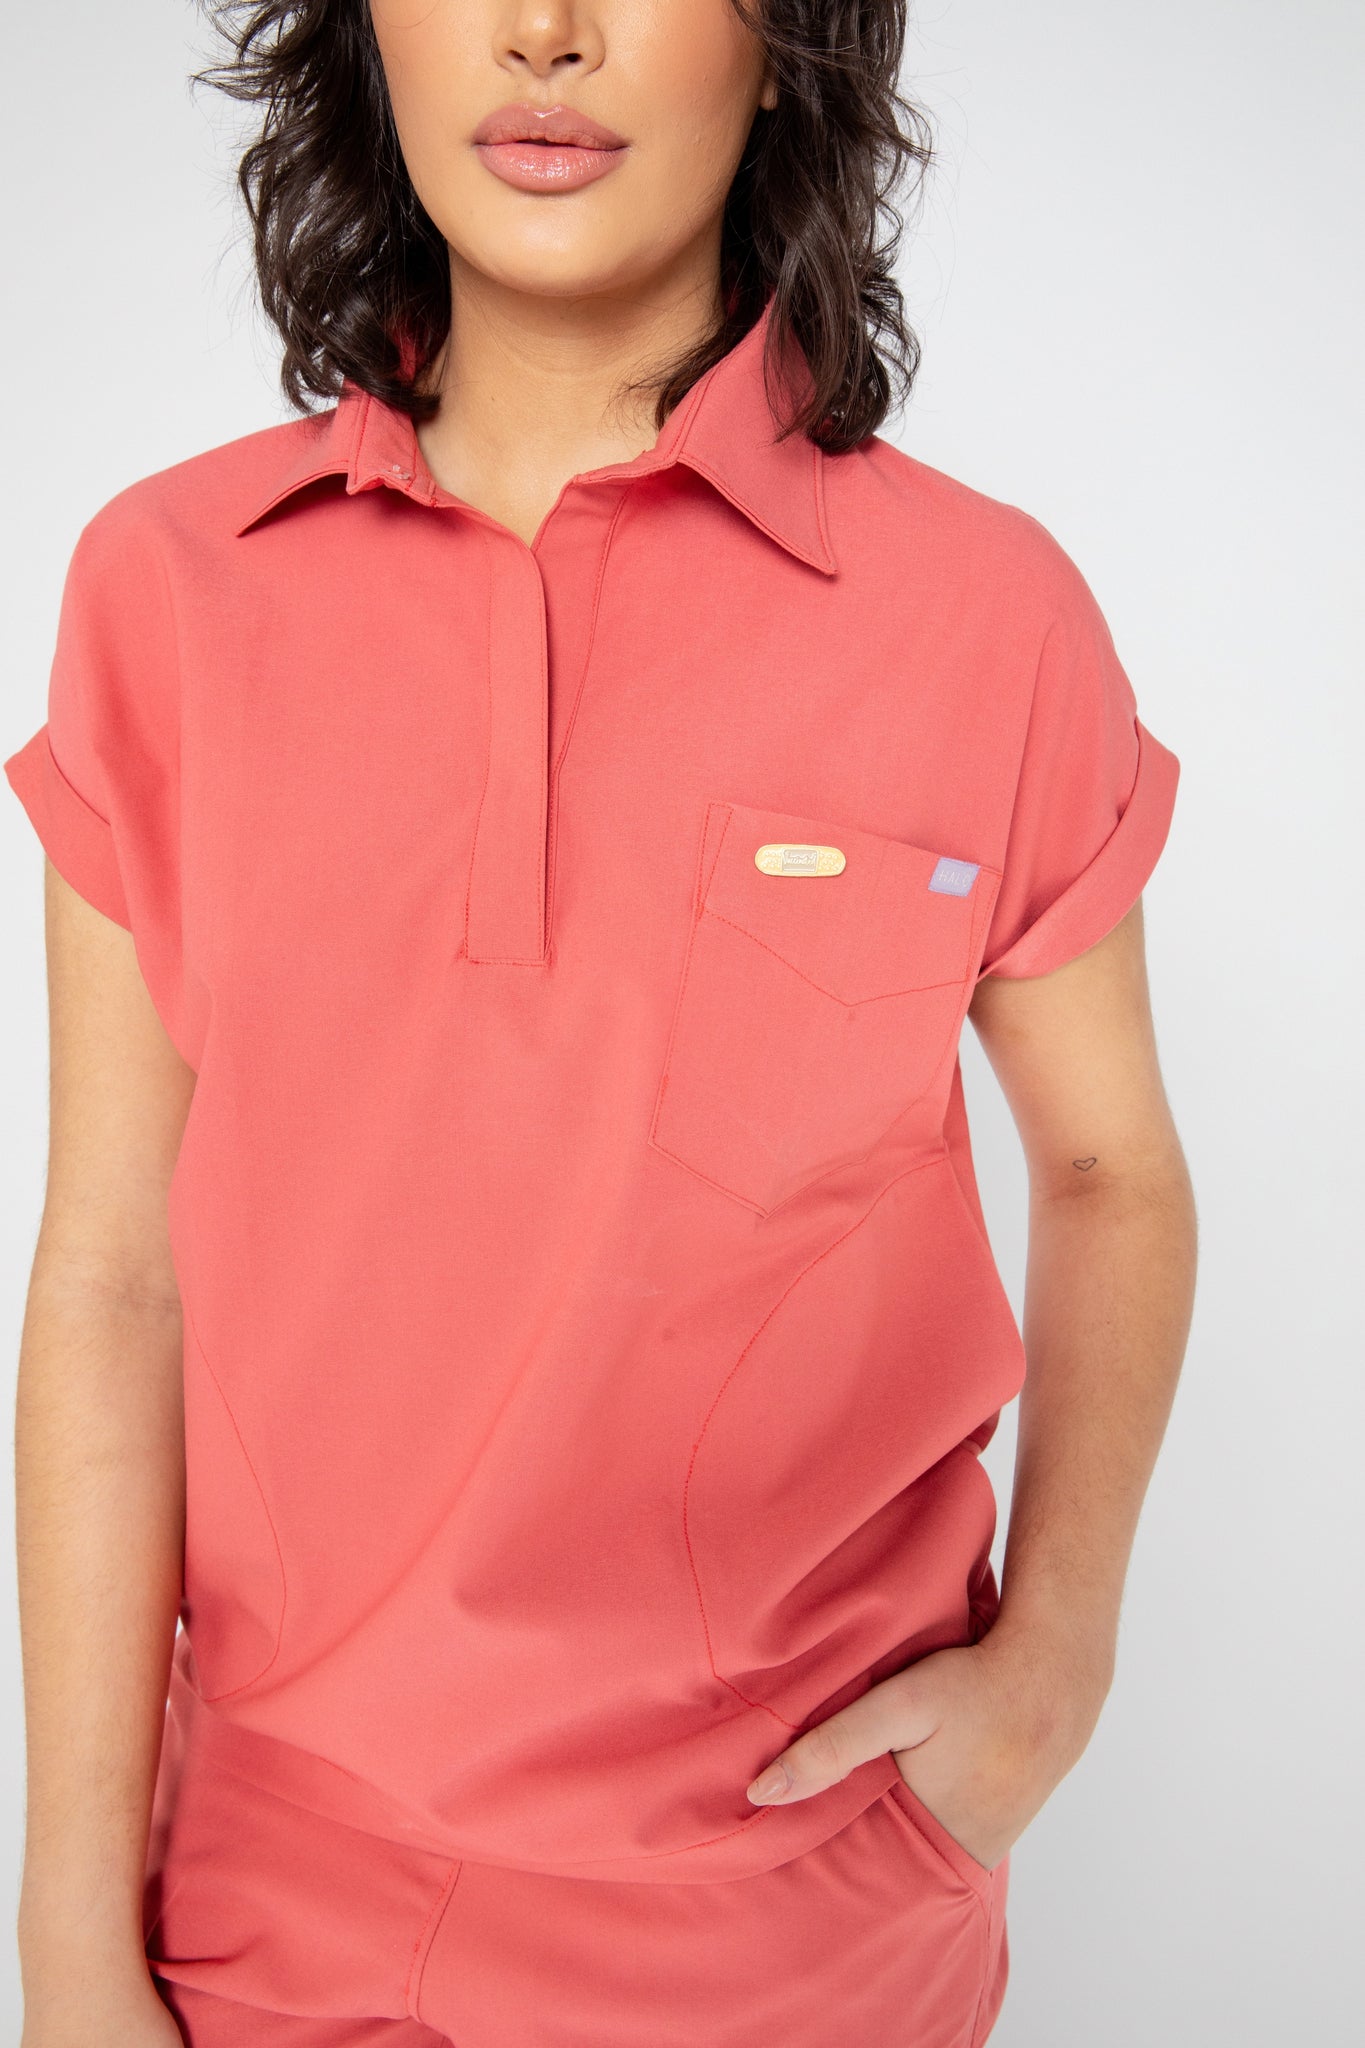 IRREPLACEABLE: POLO TOP